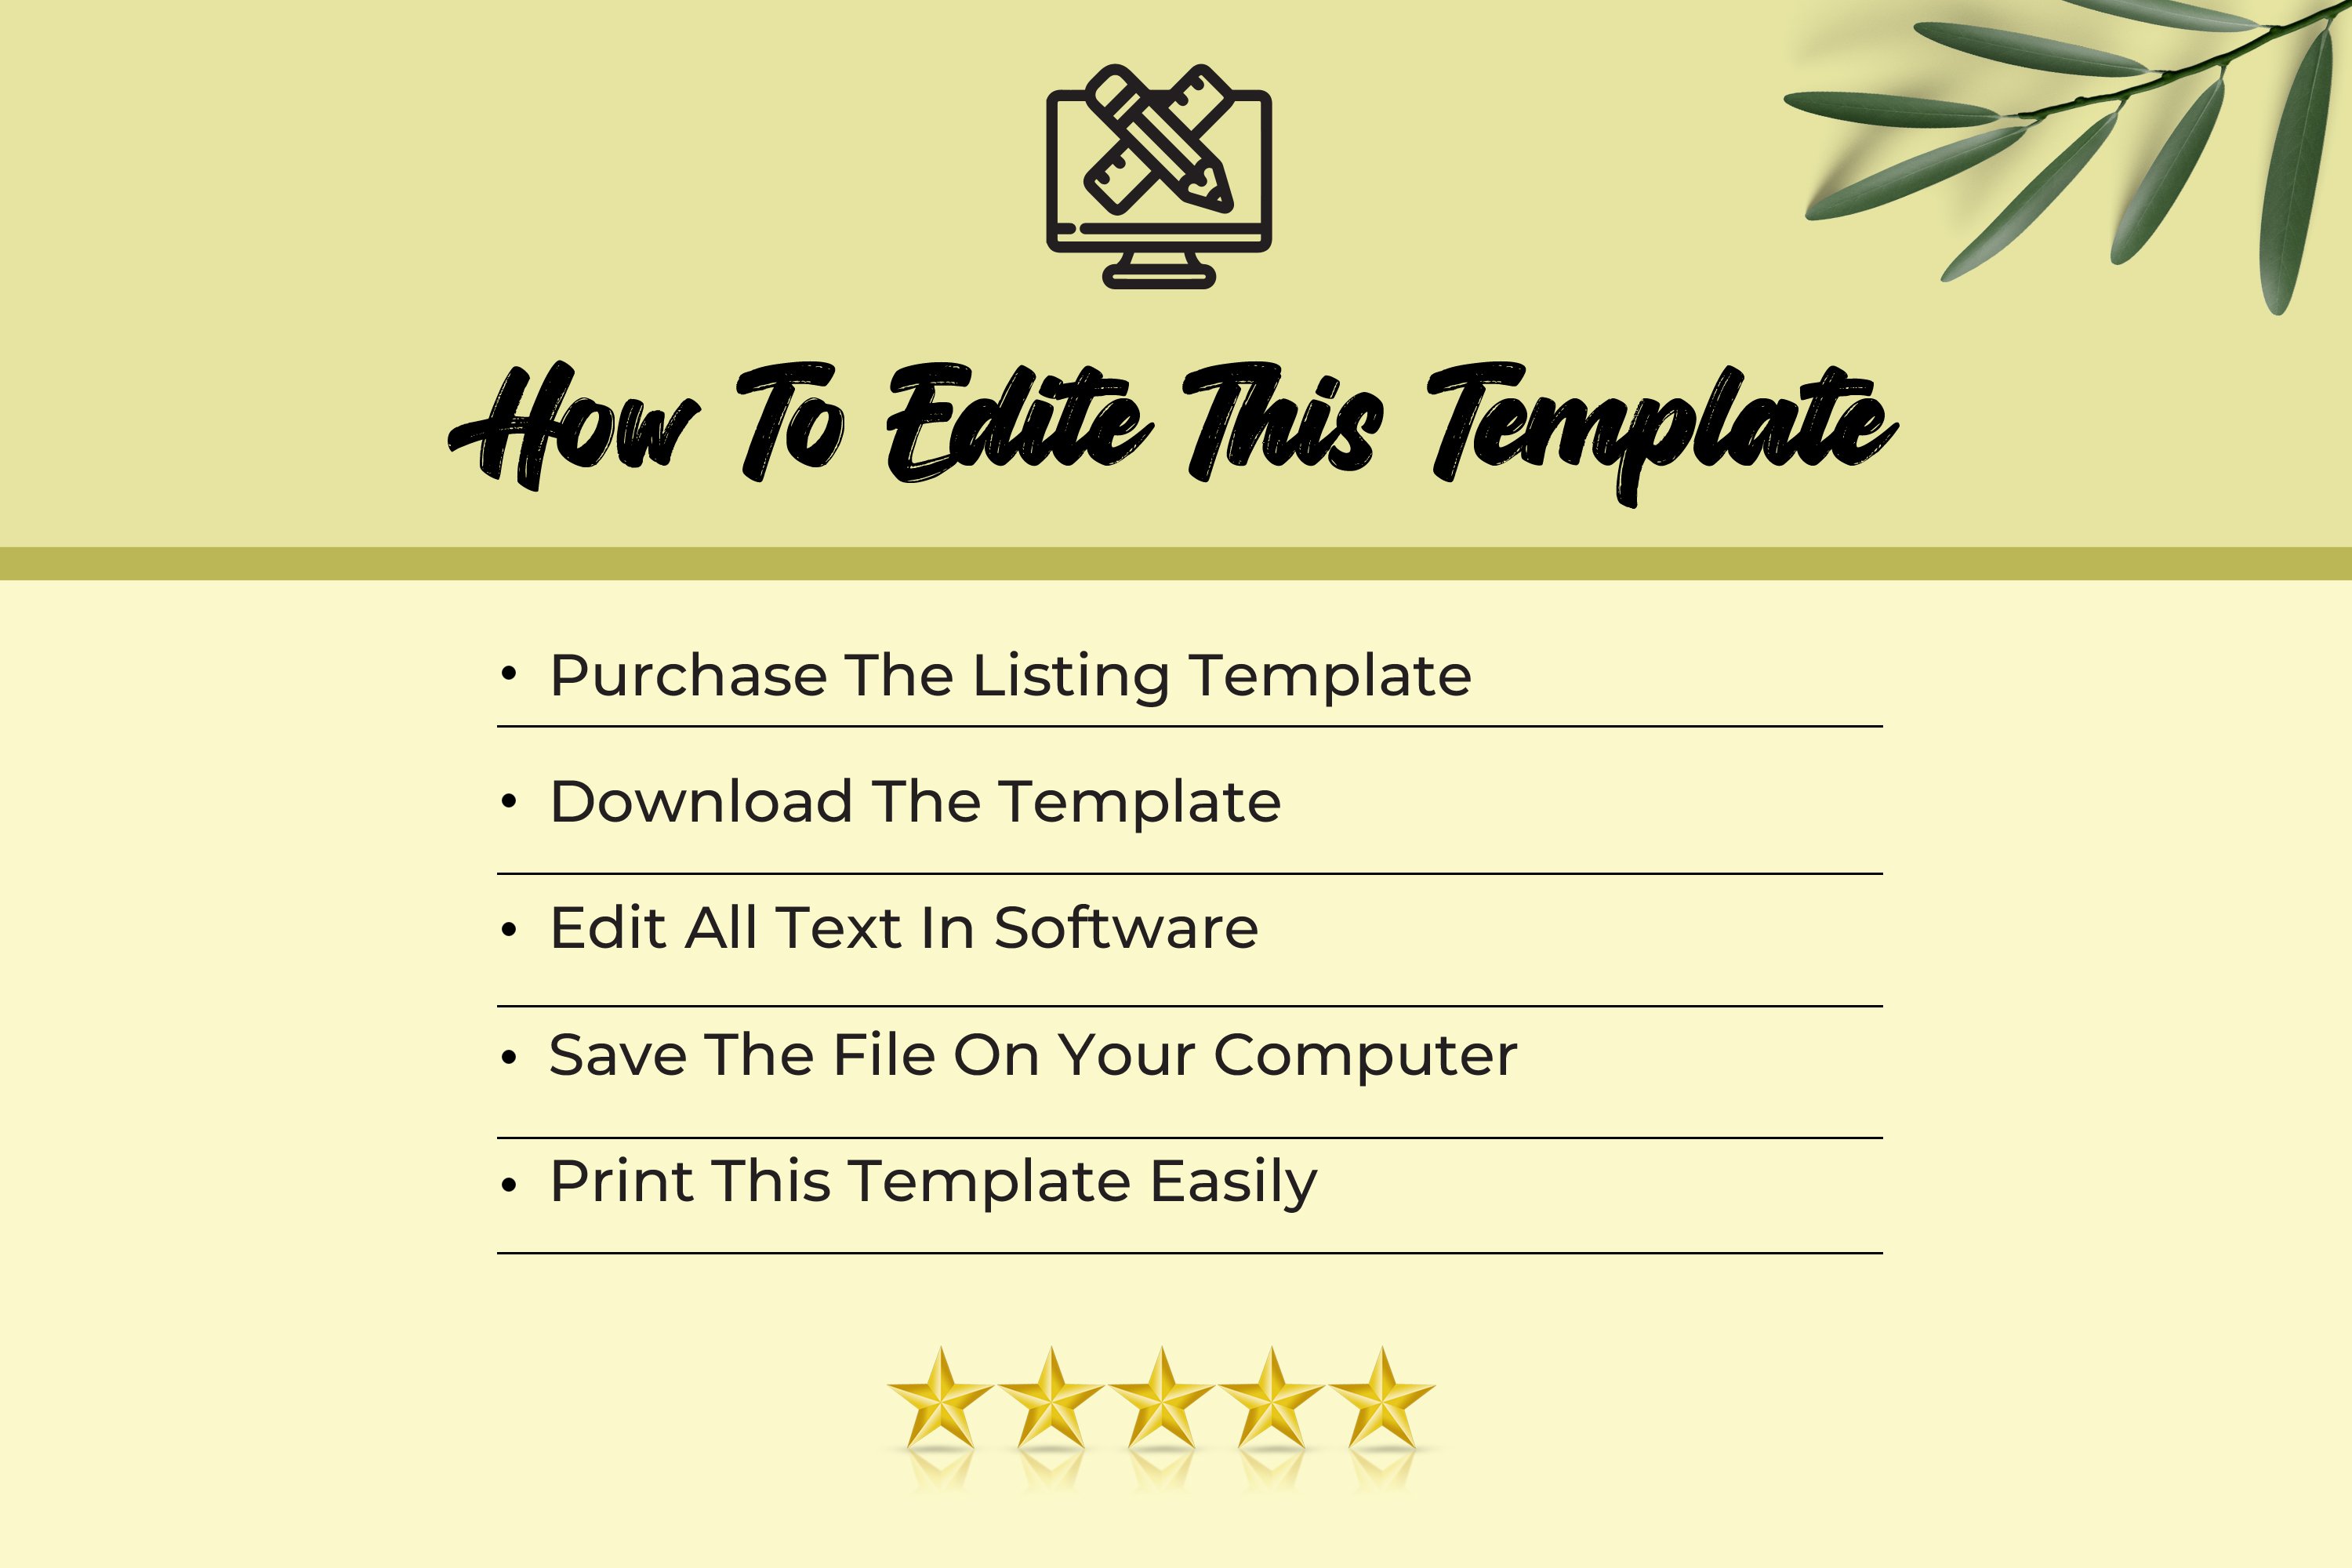 06 how to edite this template 583